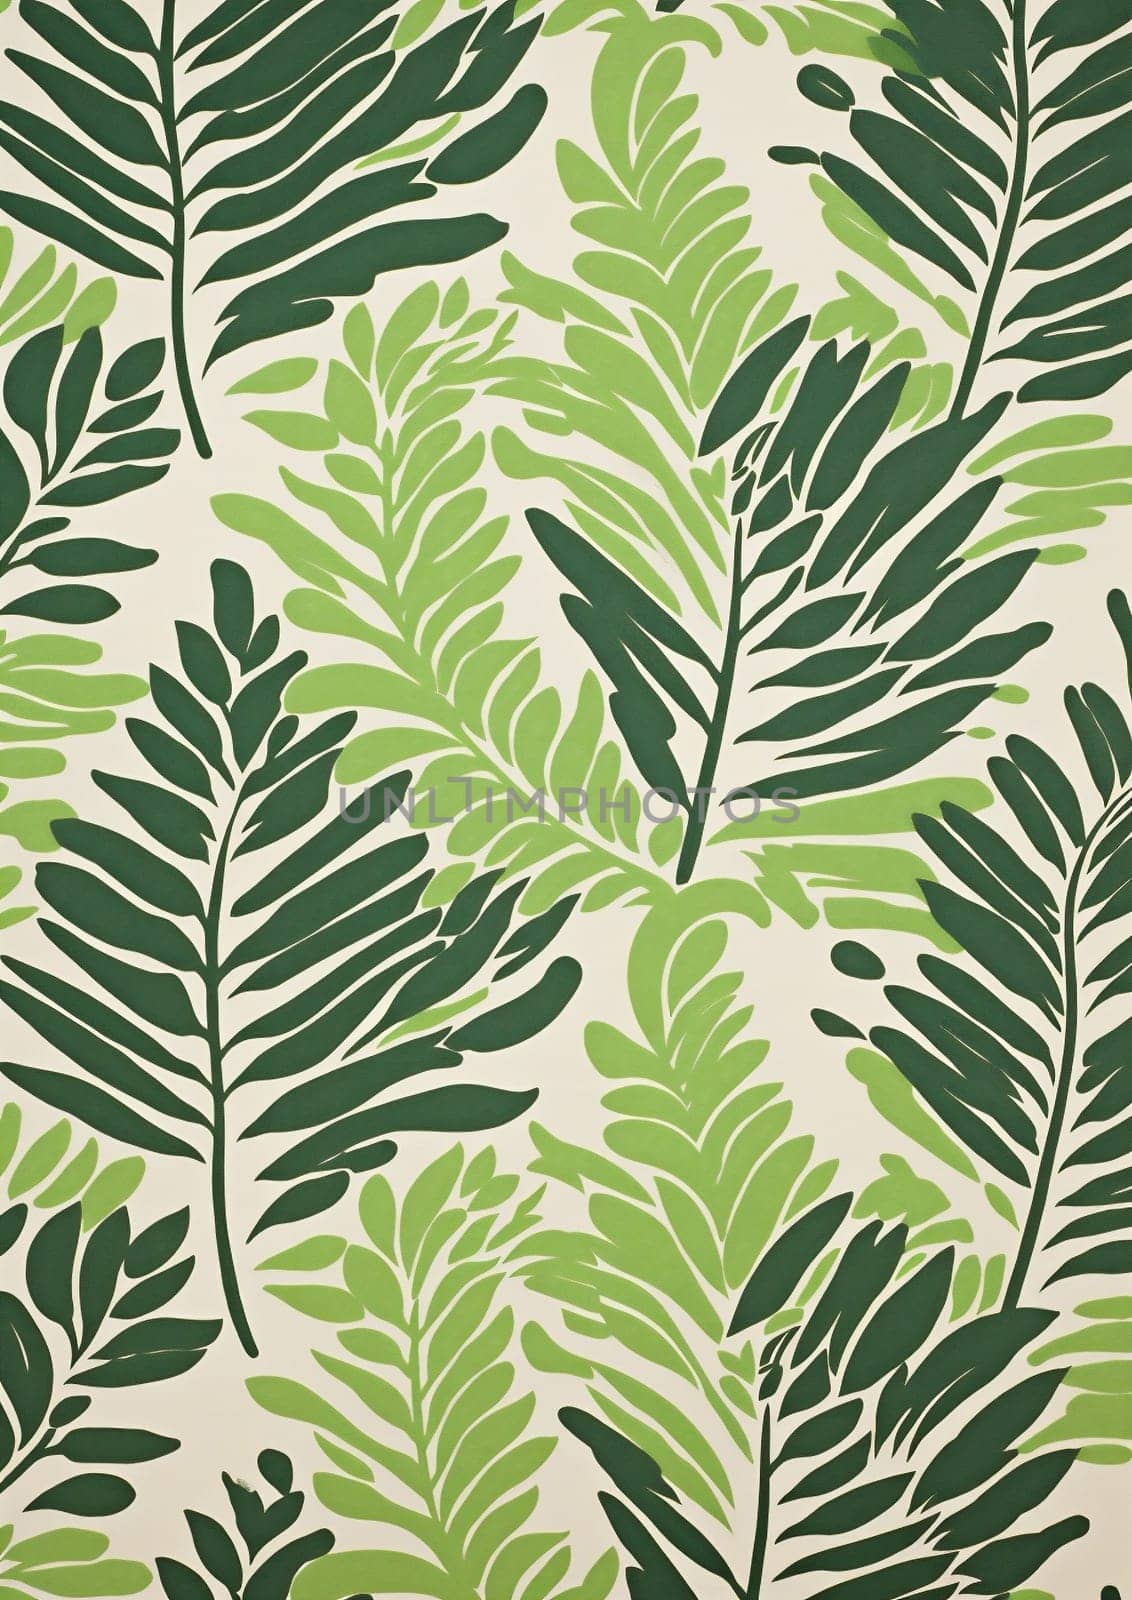 Fabric texture print wallpaper jungle background flora exotic design green summer floral tropic pattern textile palm illustration nature leaves plant seamless tree